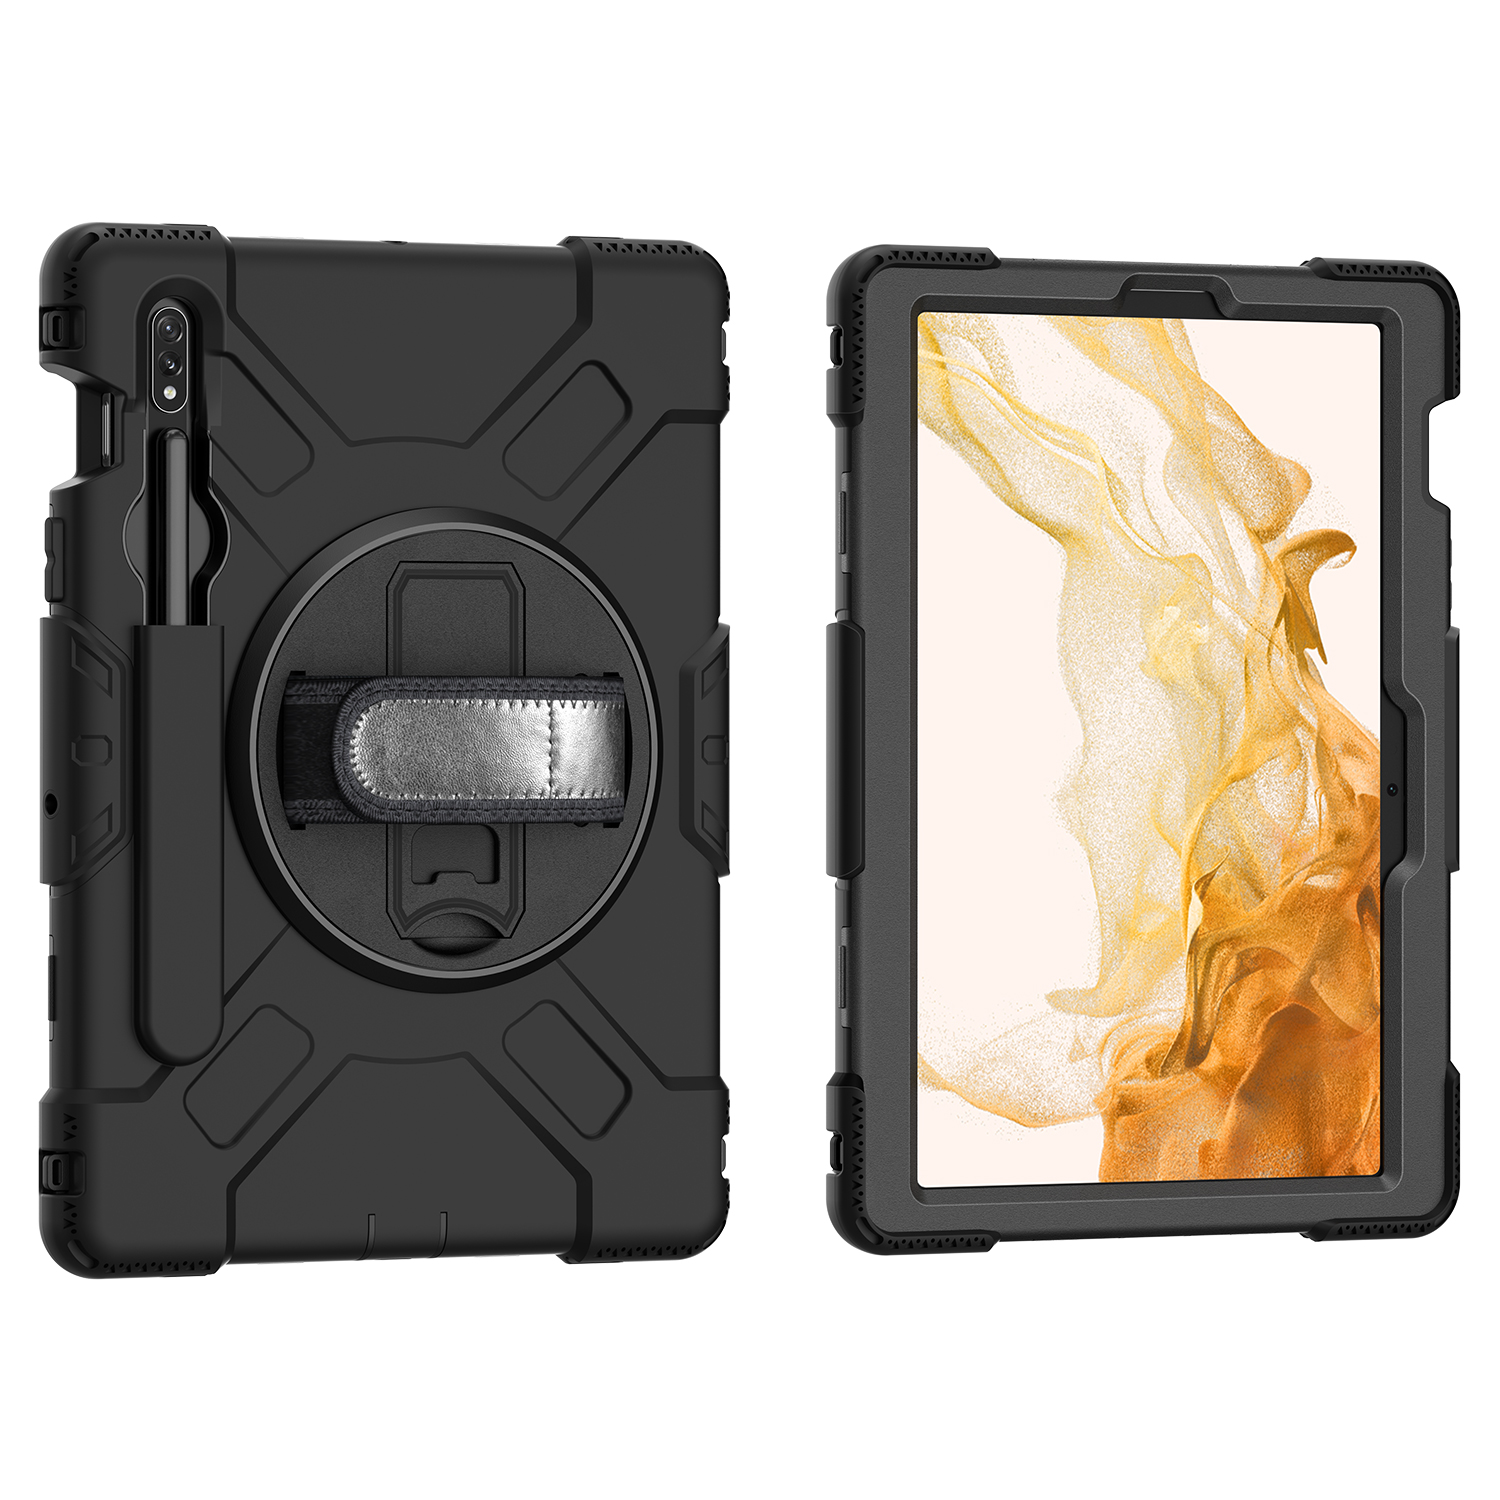 <b>Rugged case for S8</b>